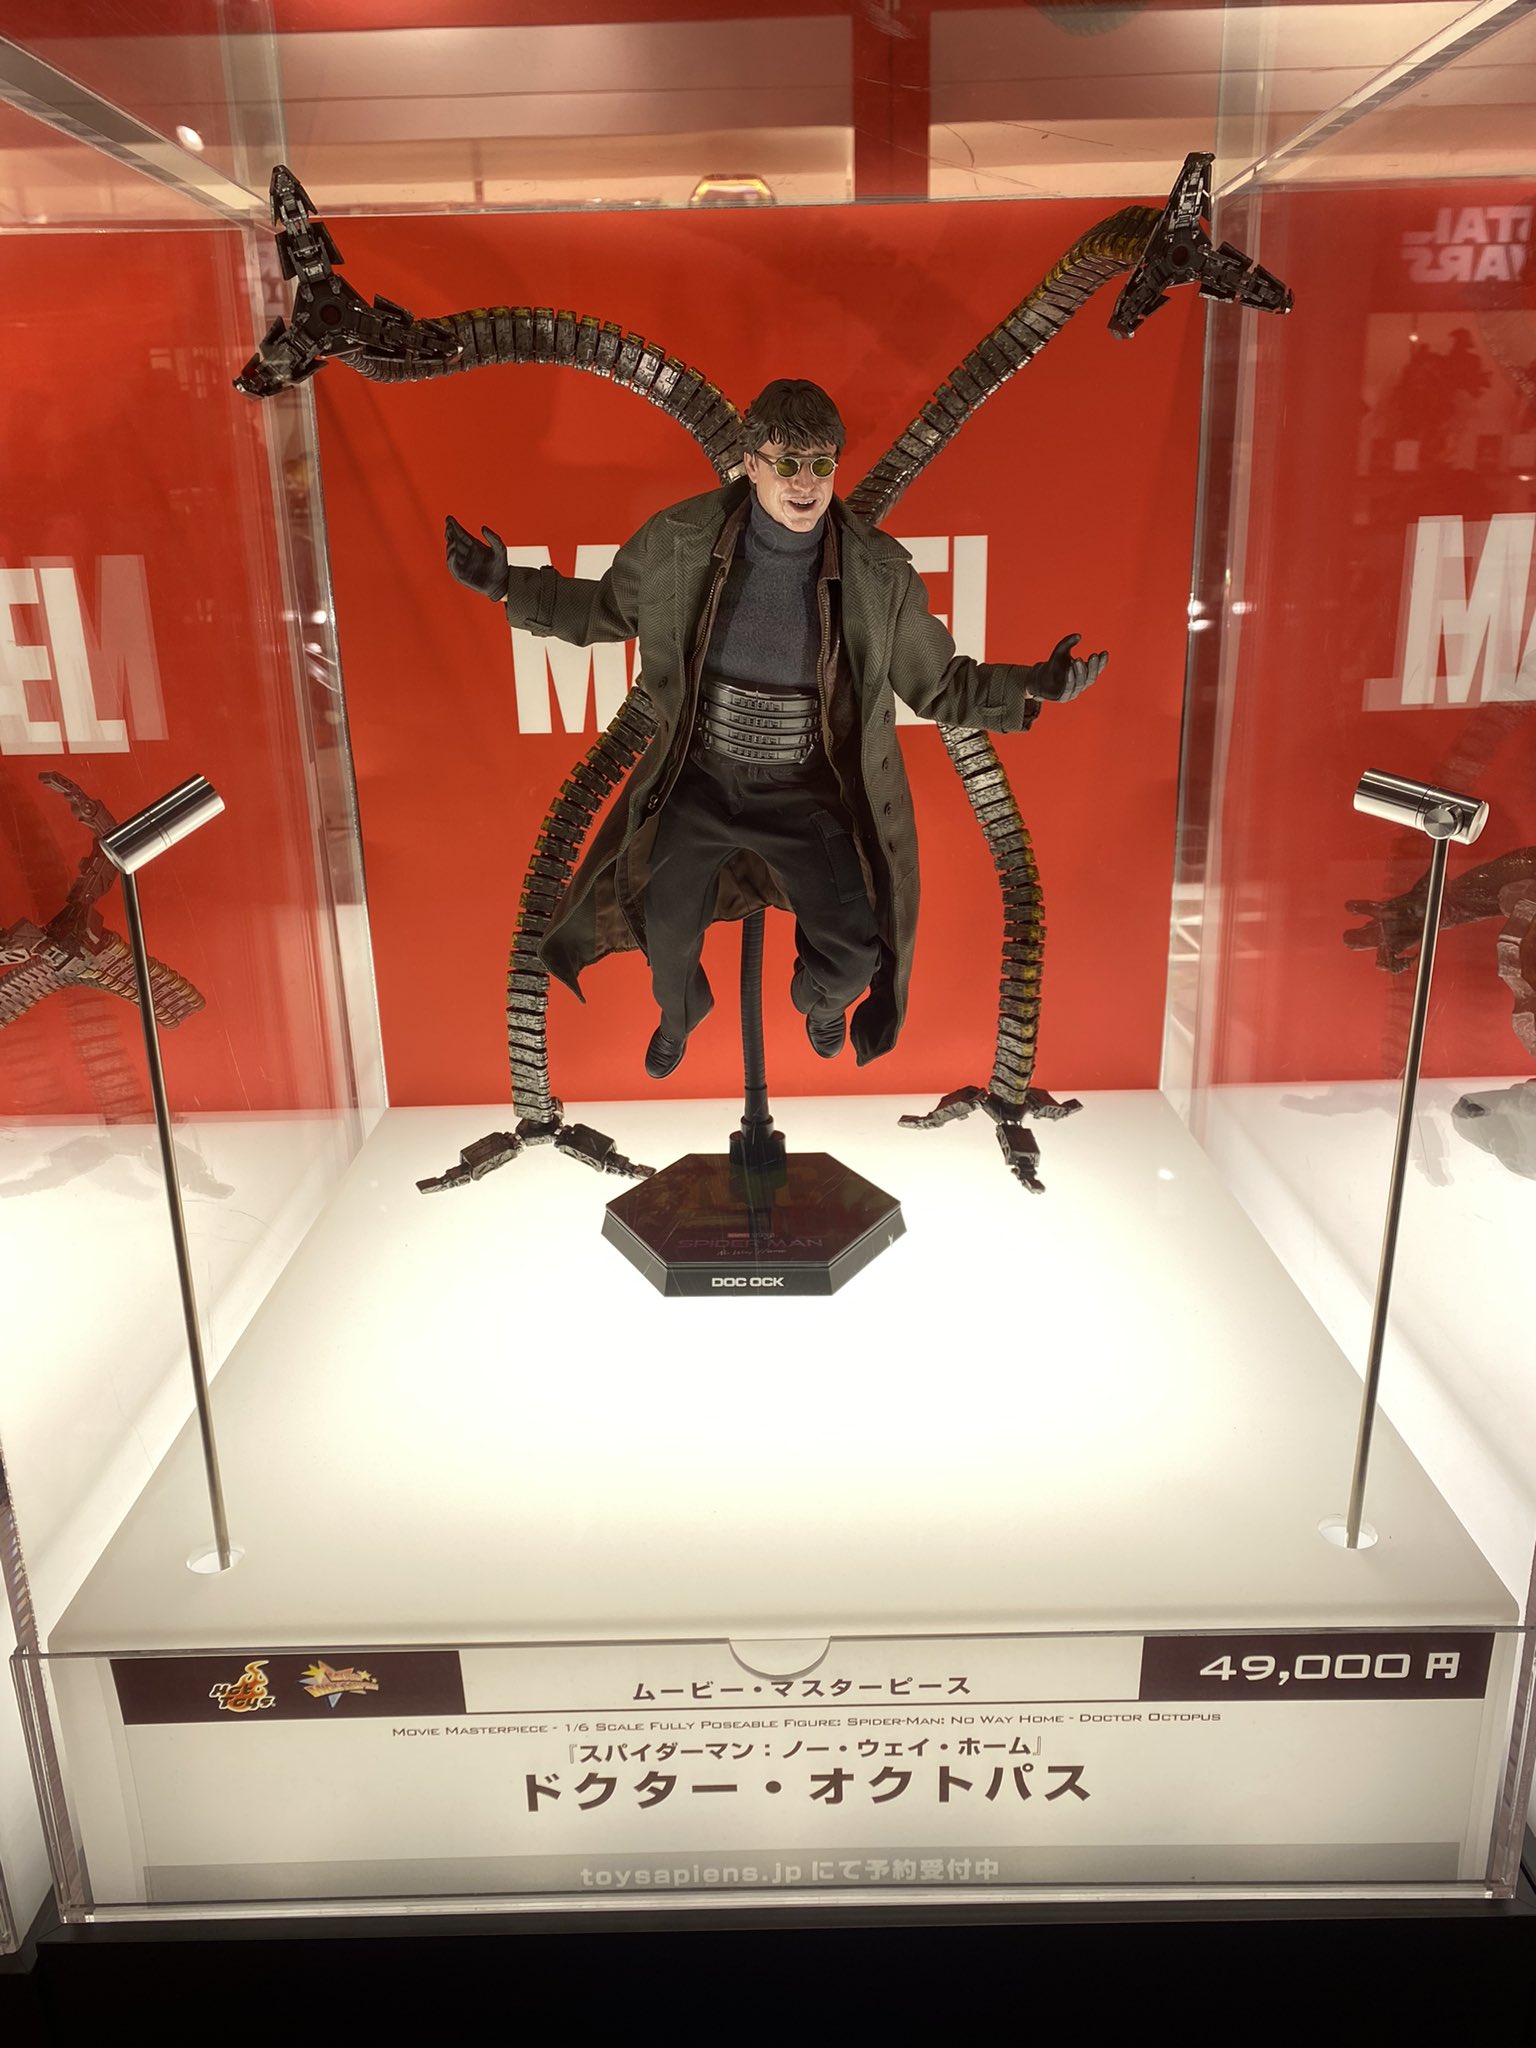 1/6 Movie Masterpiece - Fully Poseable Figure: Spider-Man: No Way Home -  Doctor Octopus